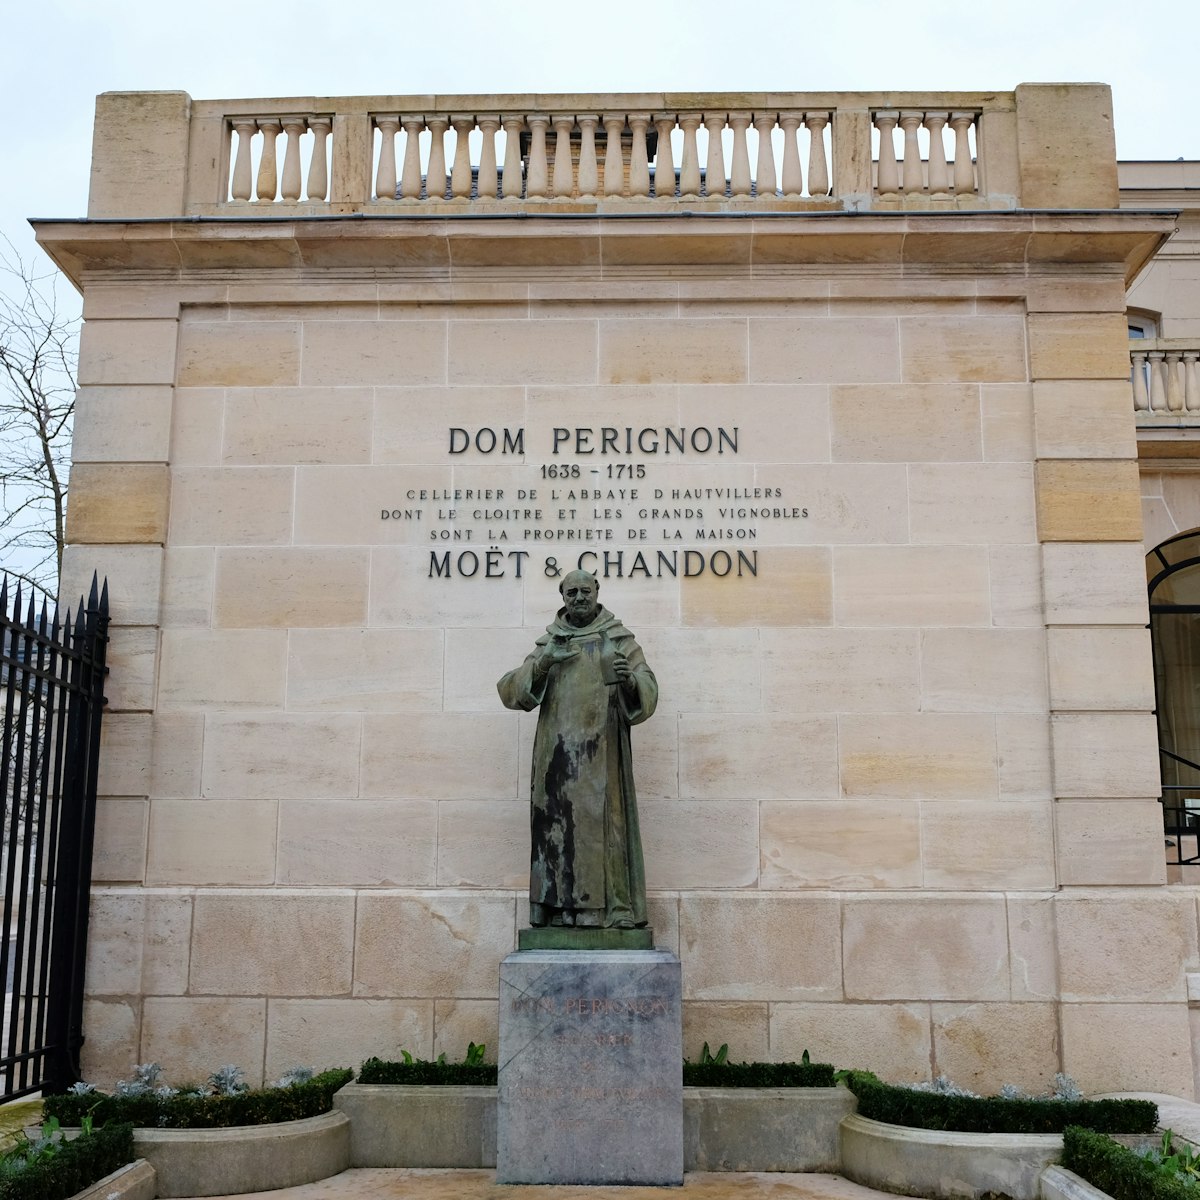 Statue of Dom Perignon at Champagne house Moët & Chandon in Epernay, France.